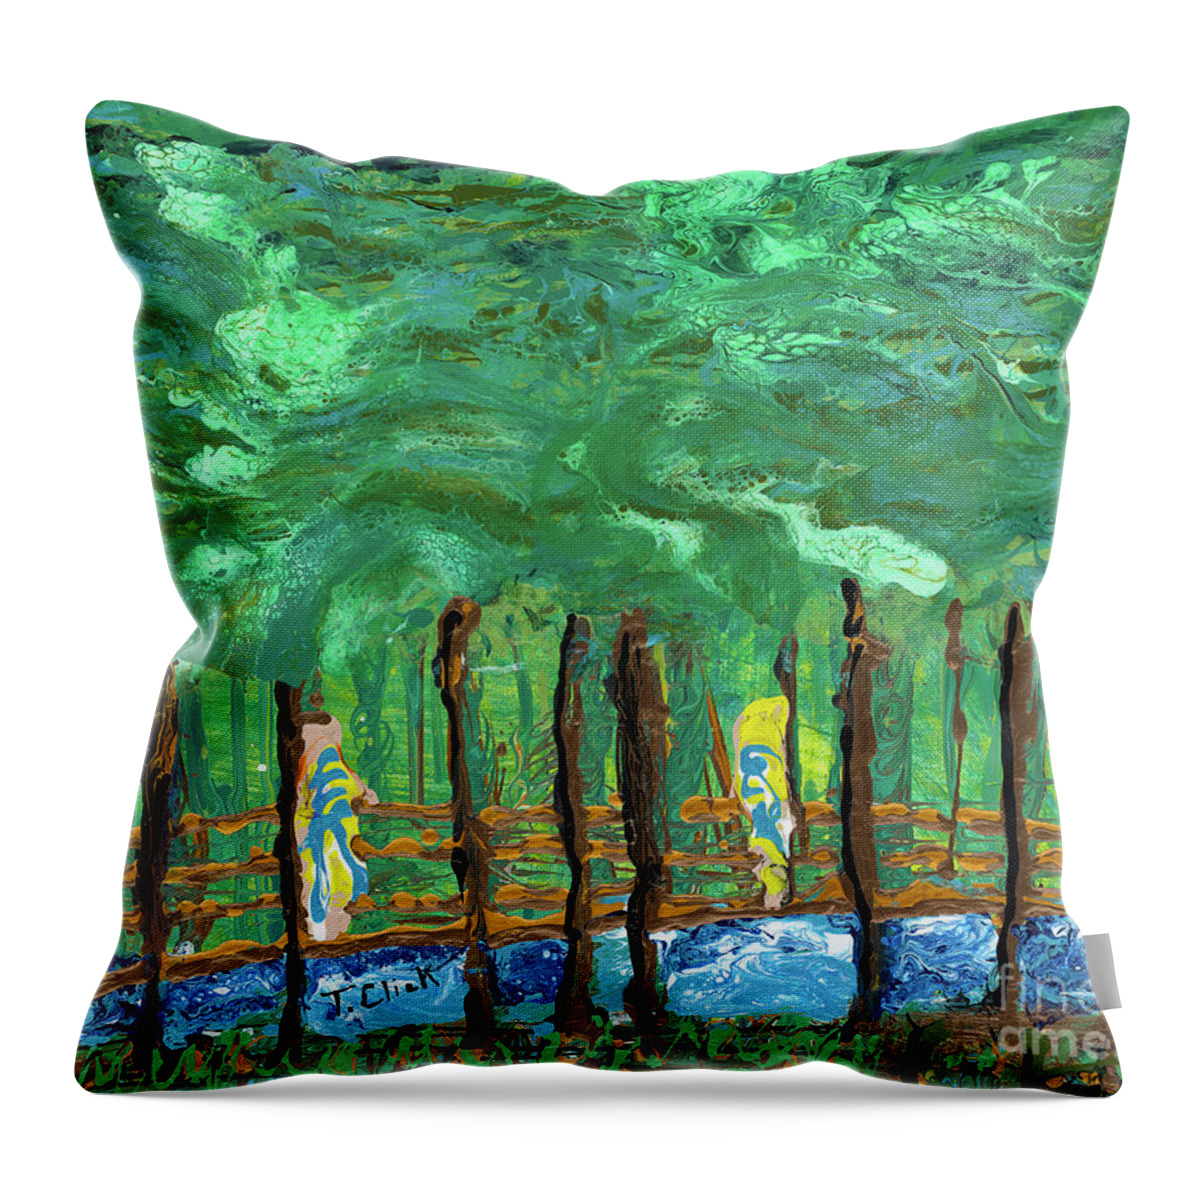 Forest Bridge Throw Pillow featuring the painting Forest Bridge by Tessa Evette